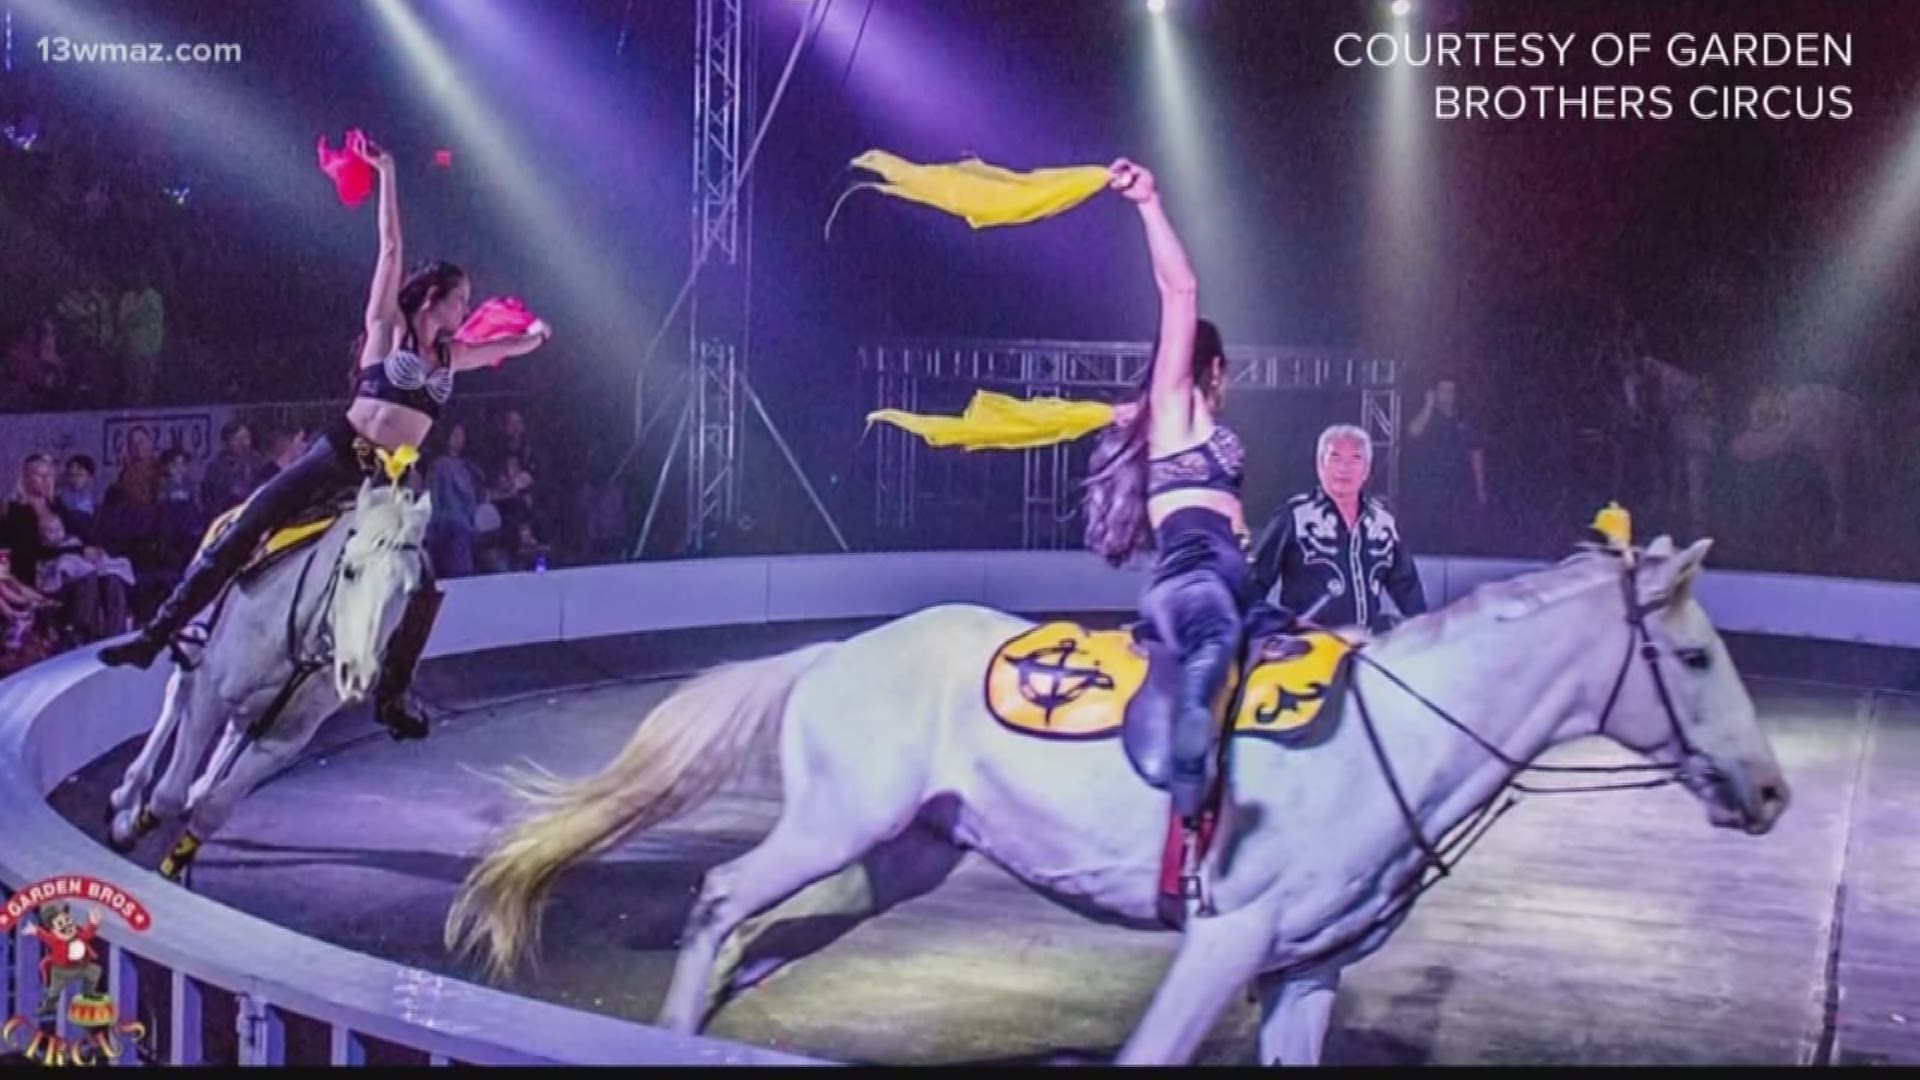 There's nothing like a visit to the circus to end your week. The Garden Brothers Circus plans to wow crowds around Central Georgia Thursday.